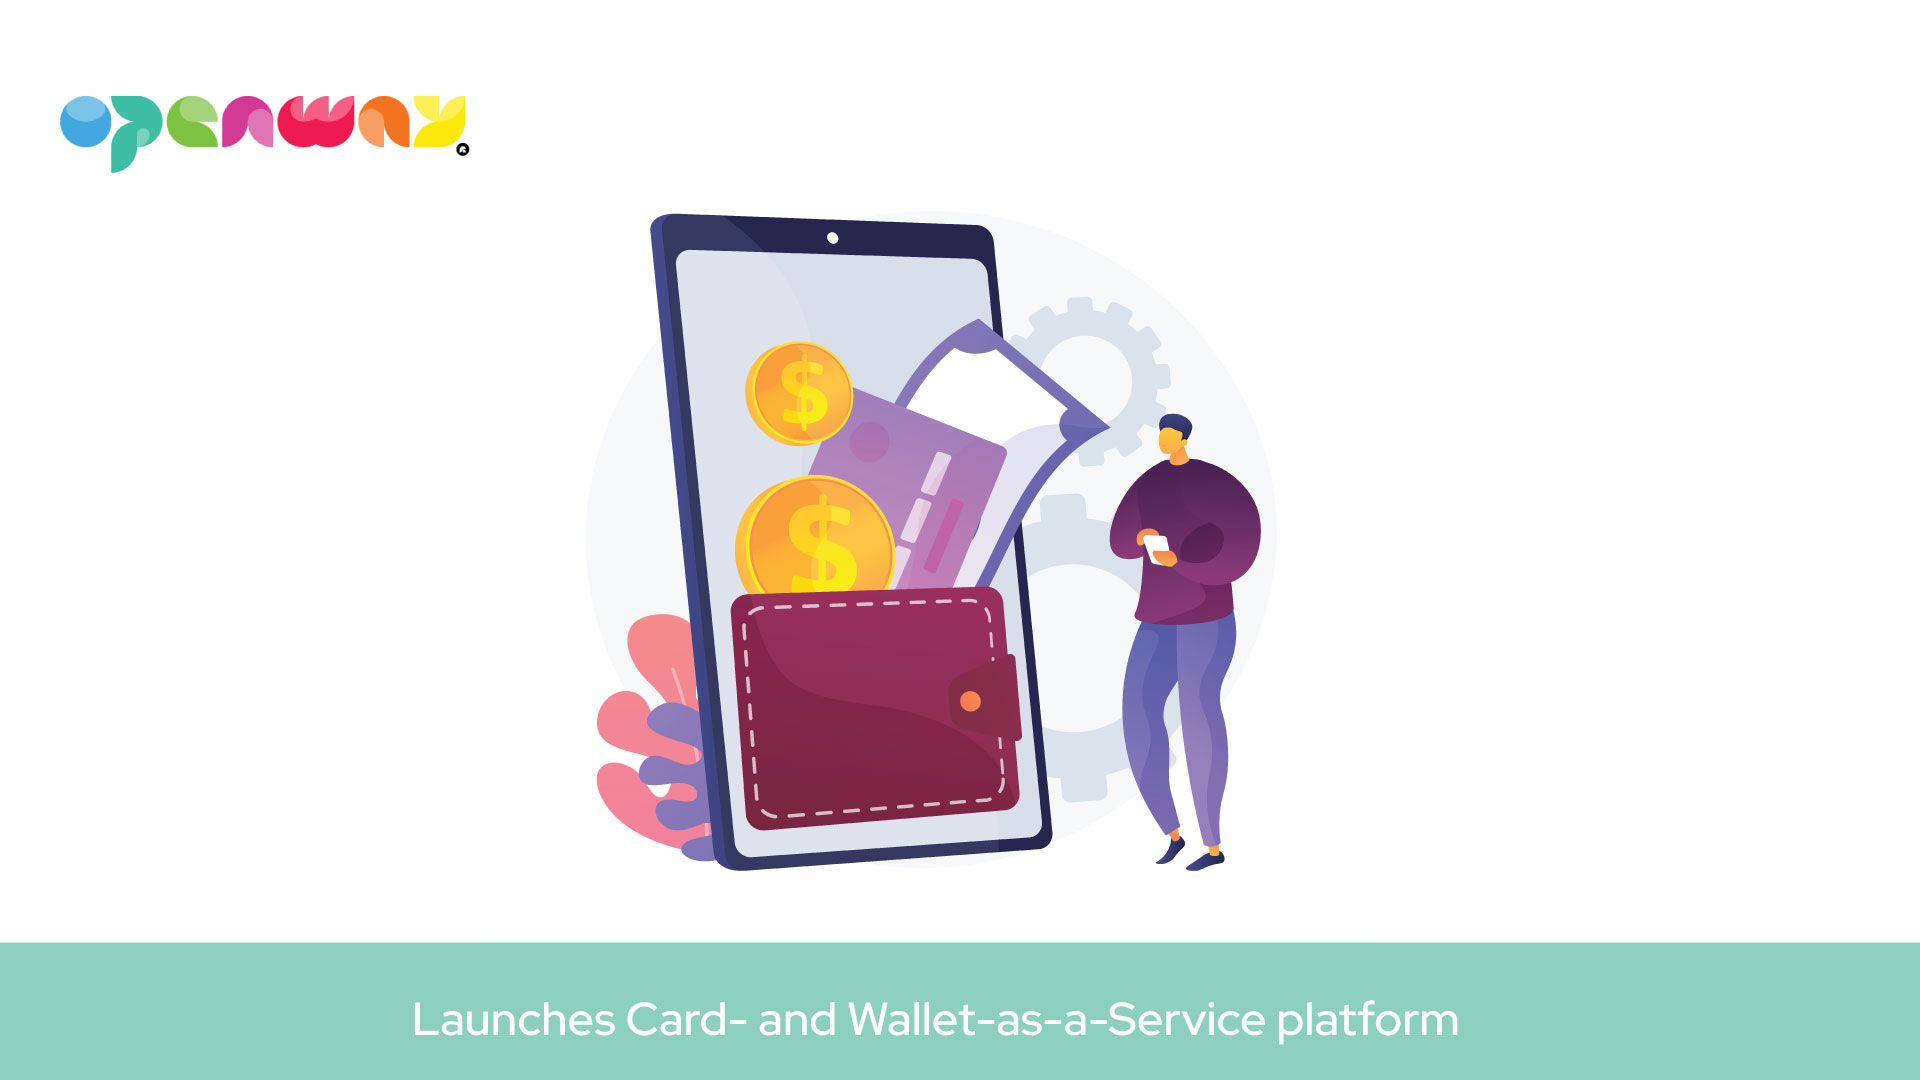 OpenWay launches Card- and Wallet-as-a-Service platform for CaaS providers across the globe